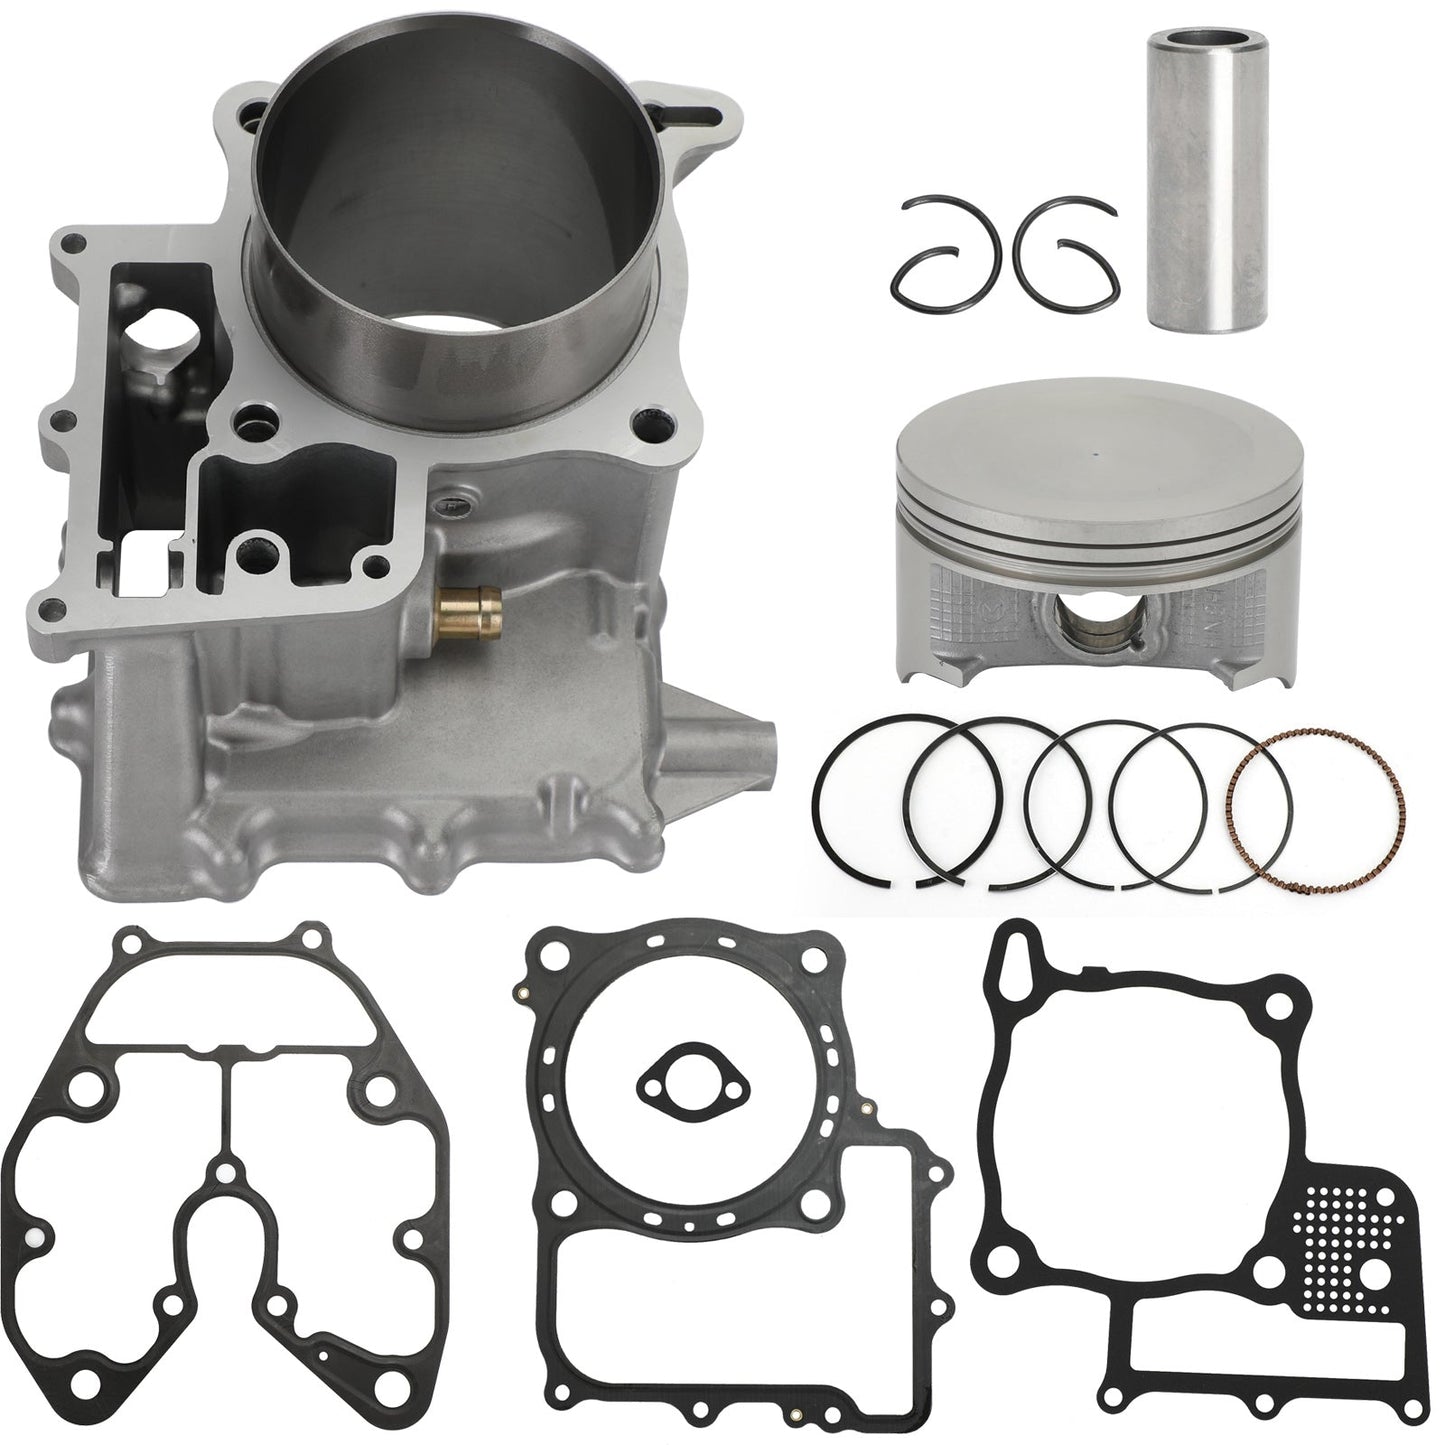 Cylinder Piston Top End Kit For Honda 14-21 SXS700 SXS 700 Pioneer 12100-HN8-A60